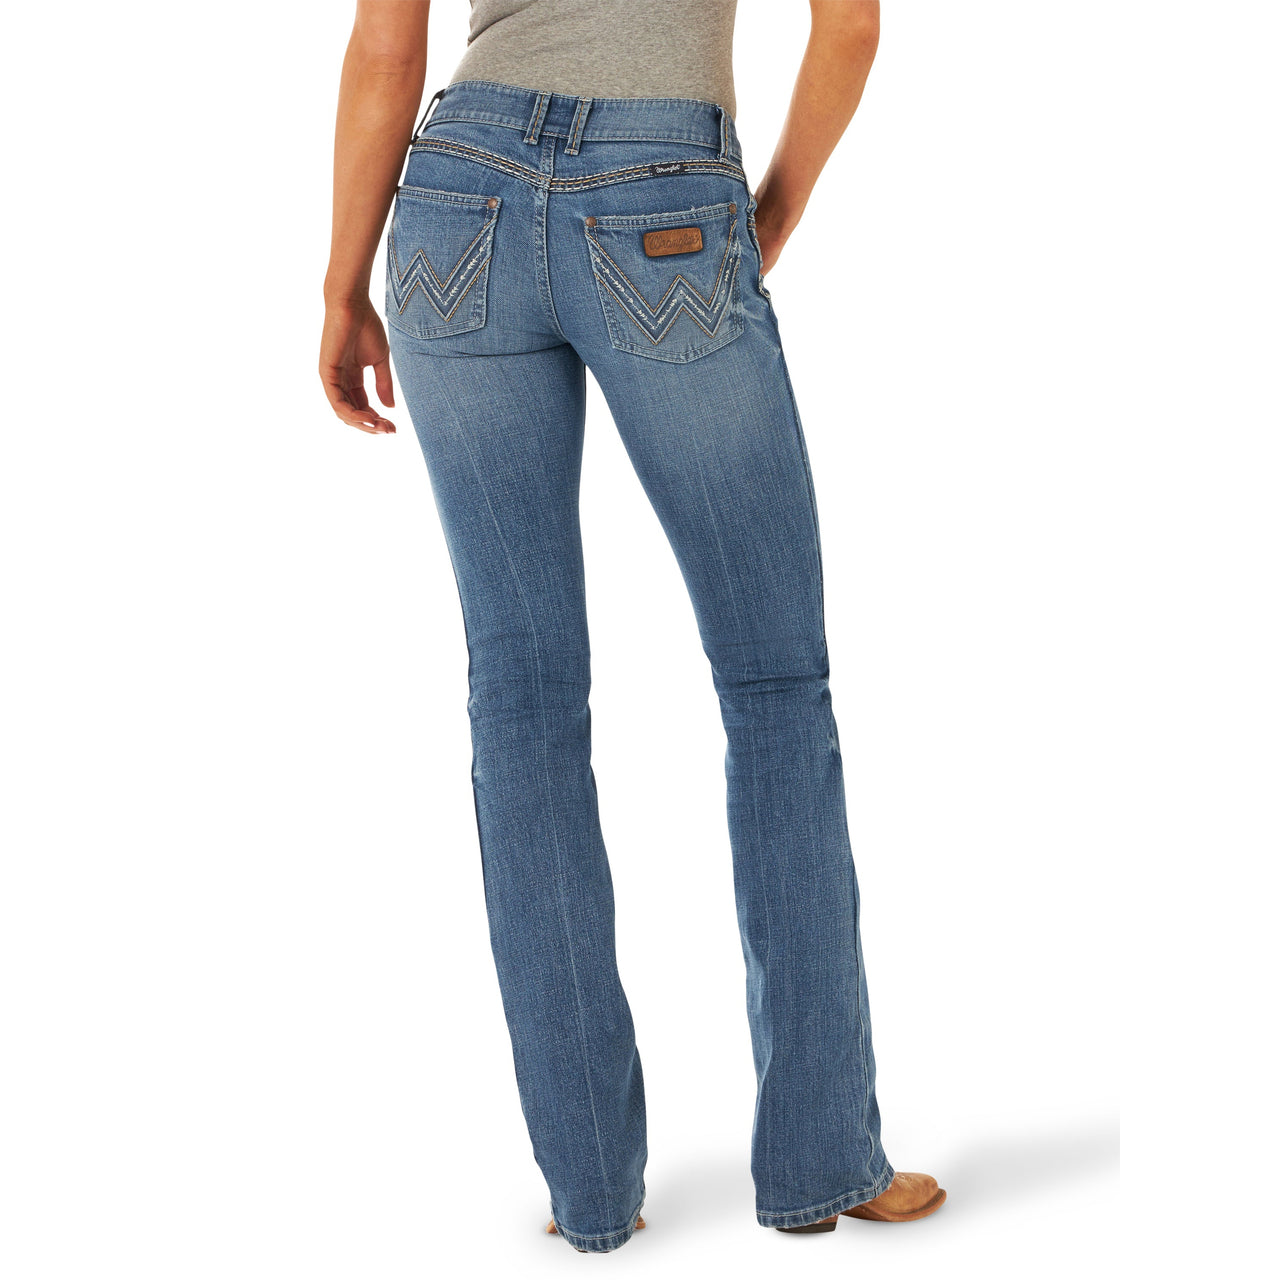 Buy Wrangler Womens High Rise Skinny Jeans That Way